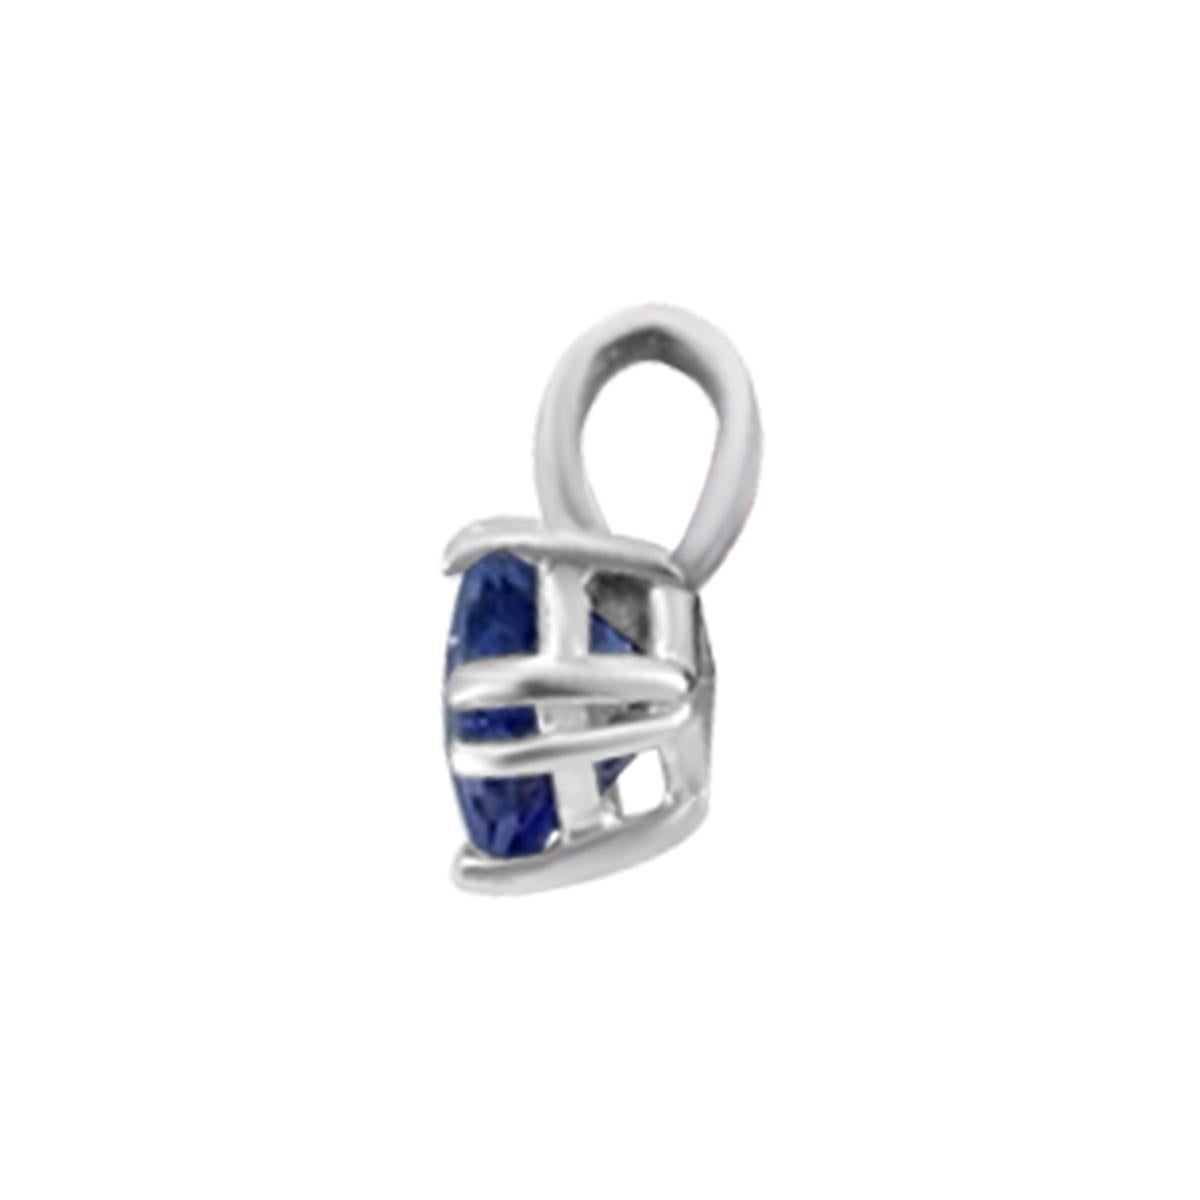 Here Is A Pretty Princess Cut 4MM Tanzanite Pendant .
You Will Have Natural Elegance When Wearing This Beautiful Pendant . This Pendant Is Perfectly Settled In 14K White Gold Complete This Striking Choice.
This Tanzanite Pendant Will Be Perfect